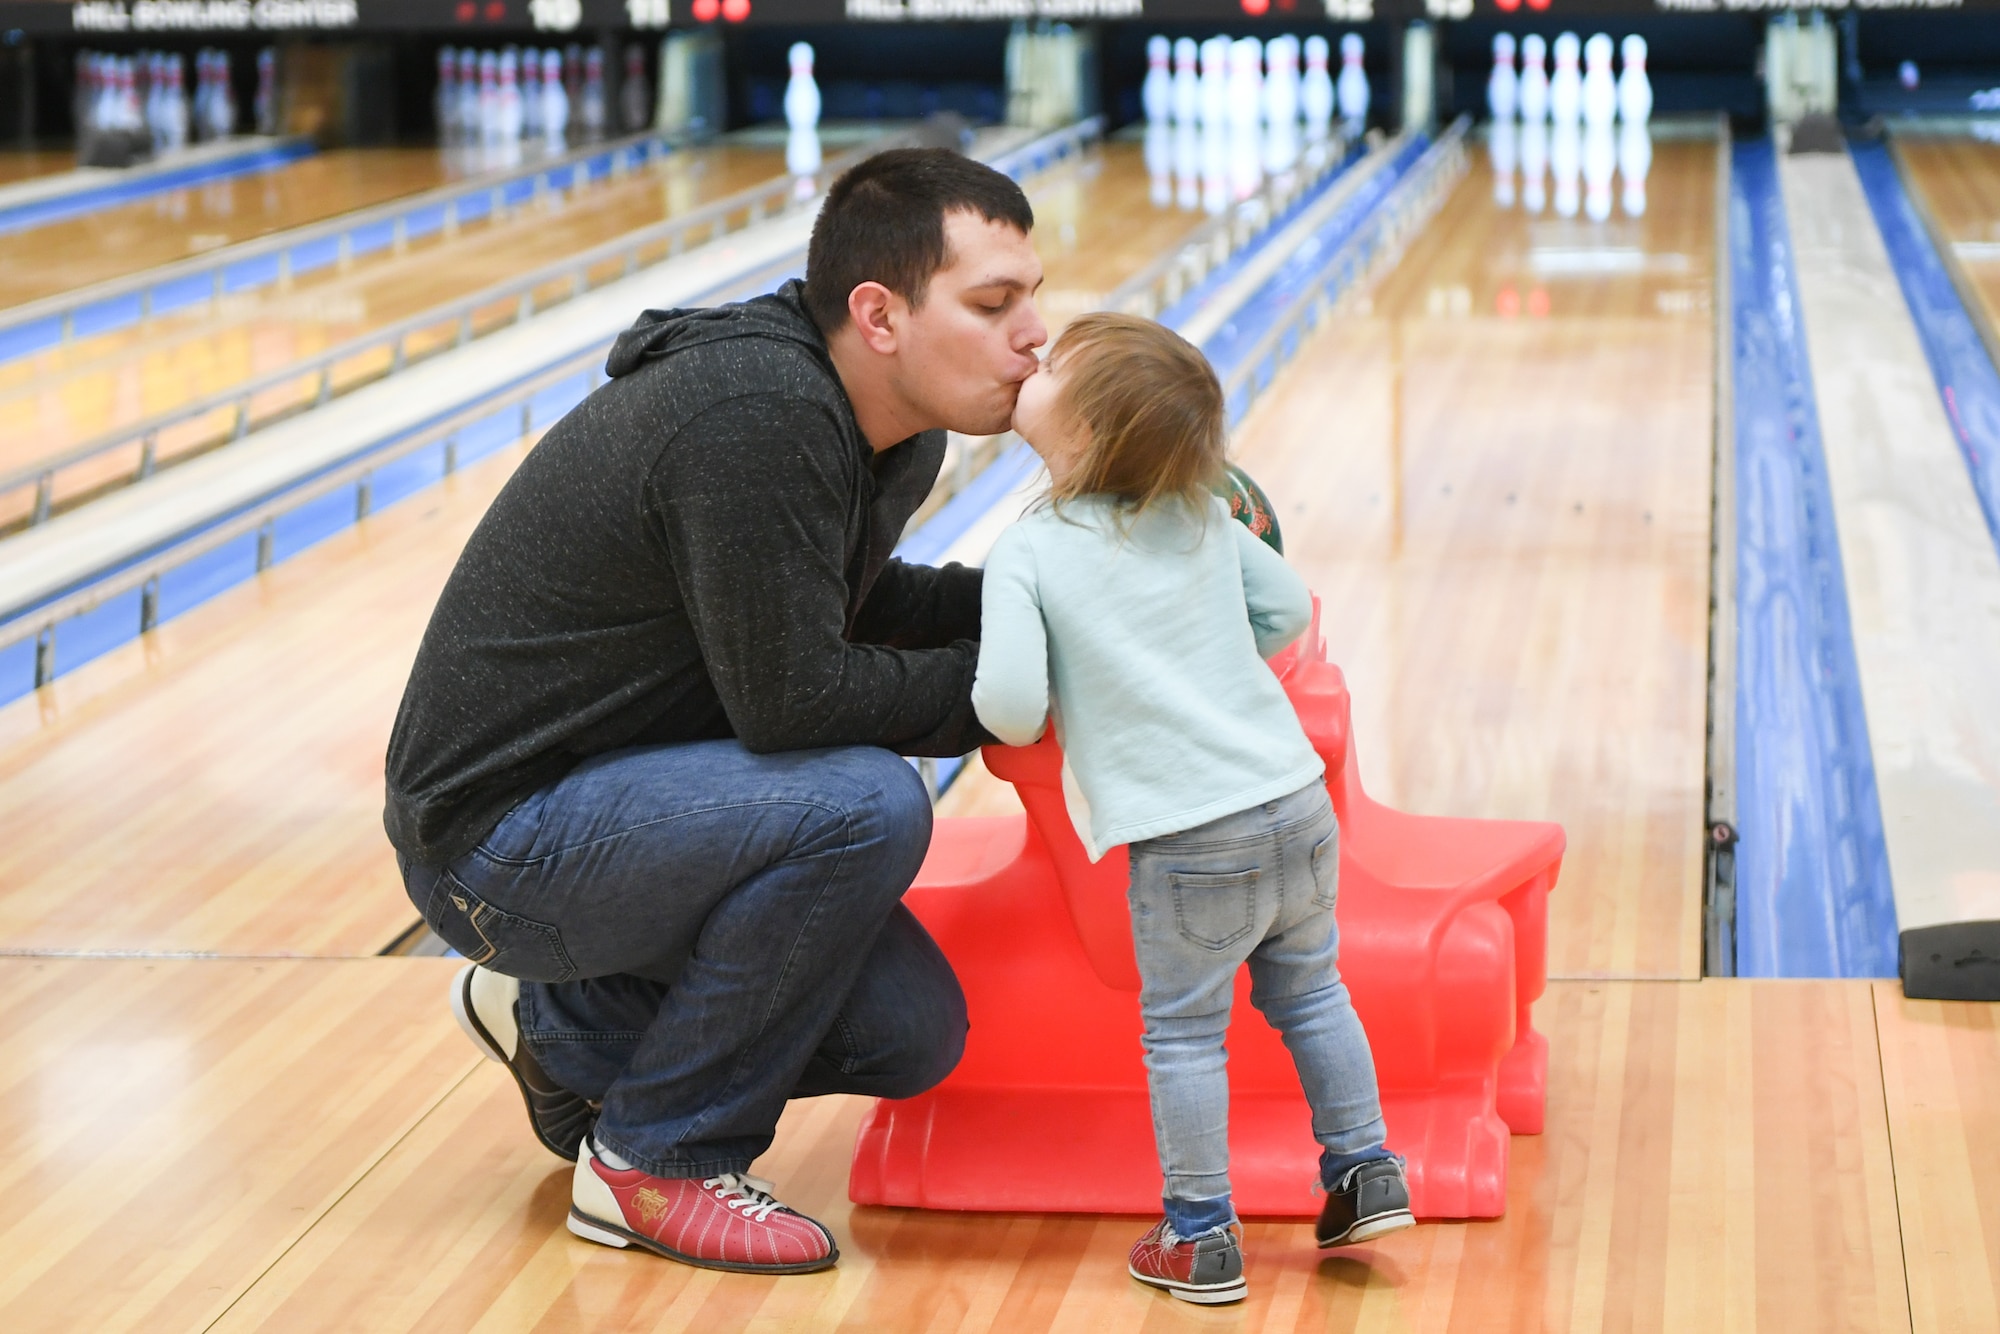 Airman Matthew Carvajal shares a moment with his daughter Ella before she bowls Jan. 30, 2019, at the bowling event held by Exceptional Family Member Program-Family Support at Hill Air Force Base, Utah. (U.S. Air Force photo by Cynthia Griggs)